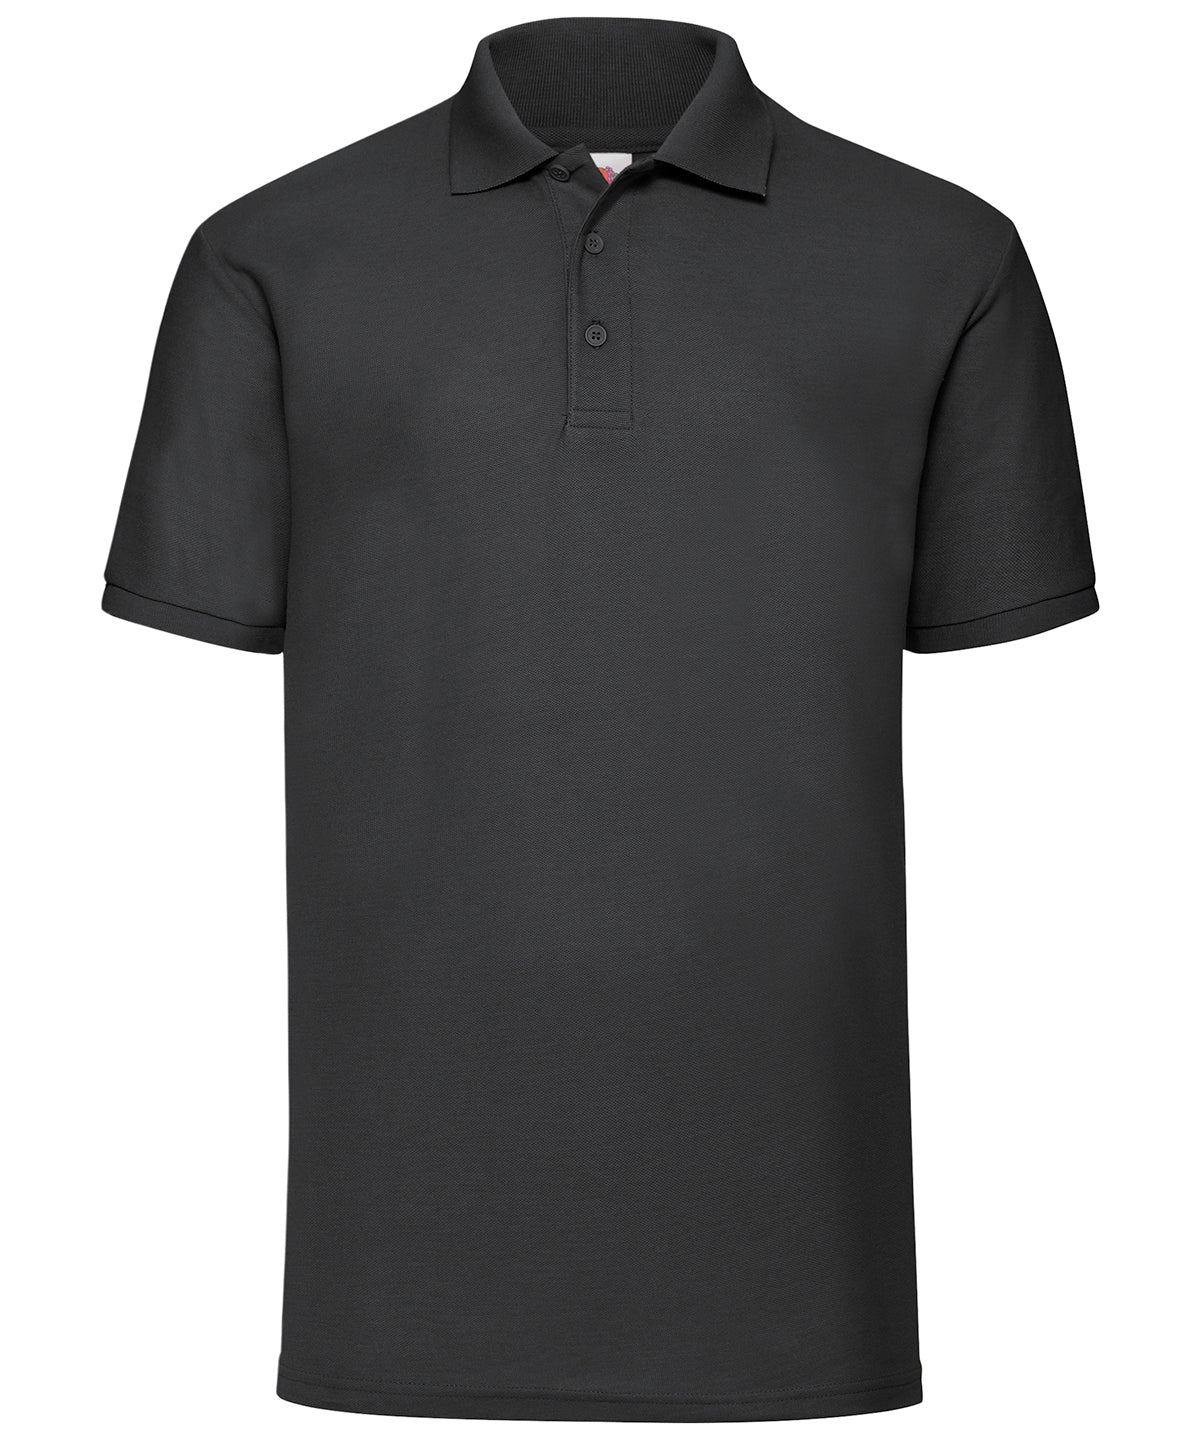 Fruit of the Loom 65/35 Polo Black